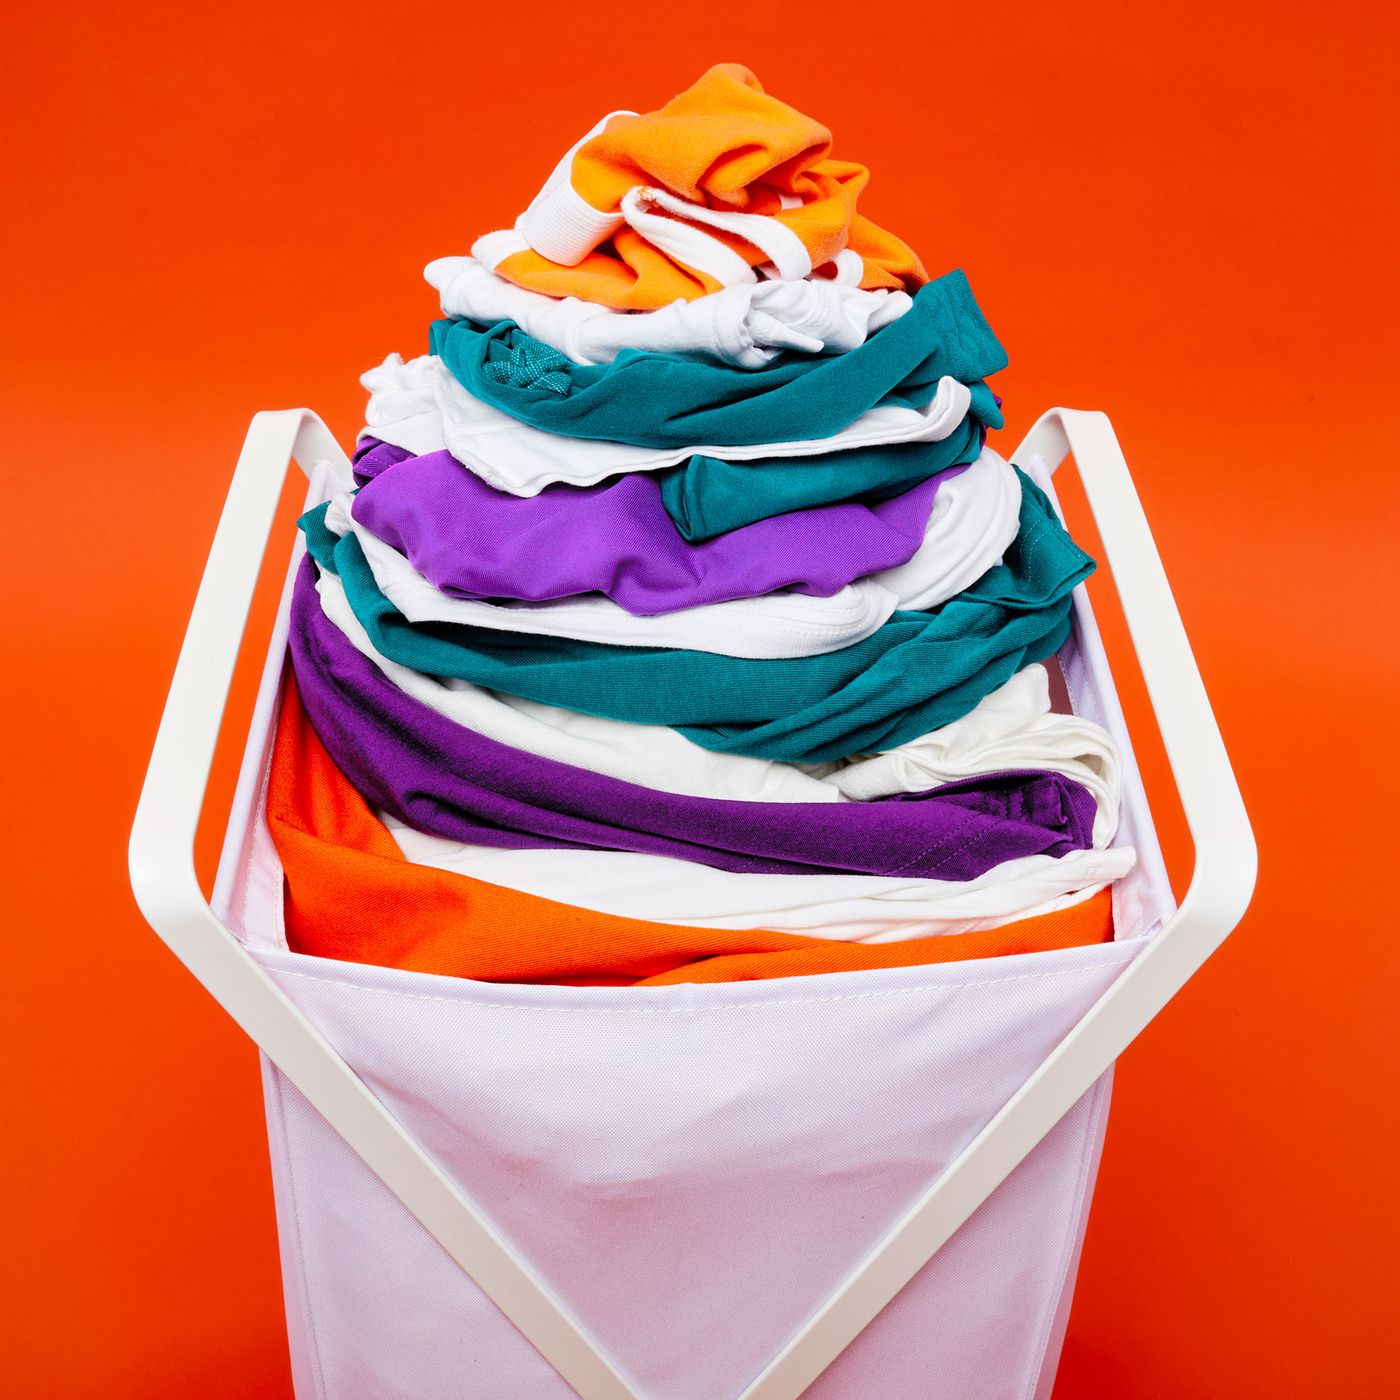 Things to Consider When Buying a Laundry Basket